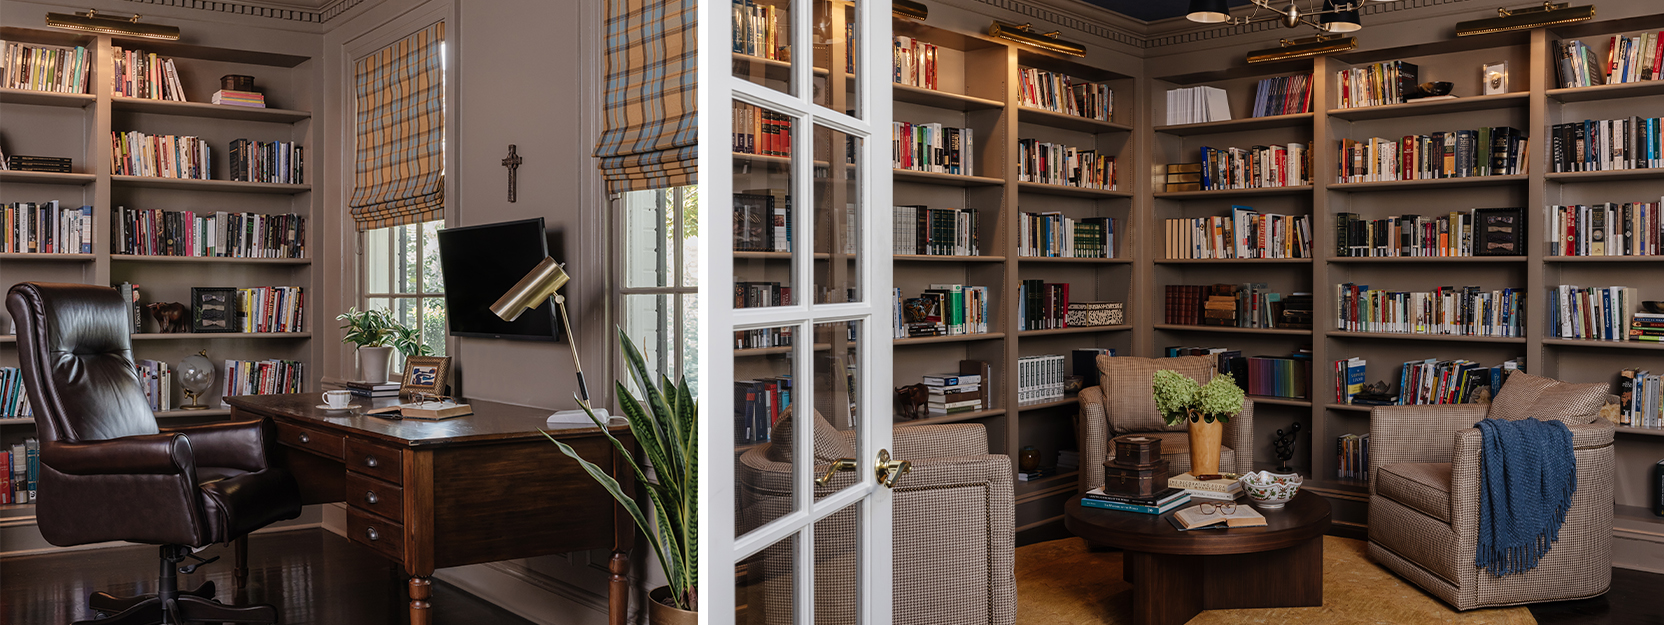 Home library, office, and gathering space with a neutral color scheme, shelves full of books, and three upholstered armchairs behind white French doors.